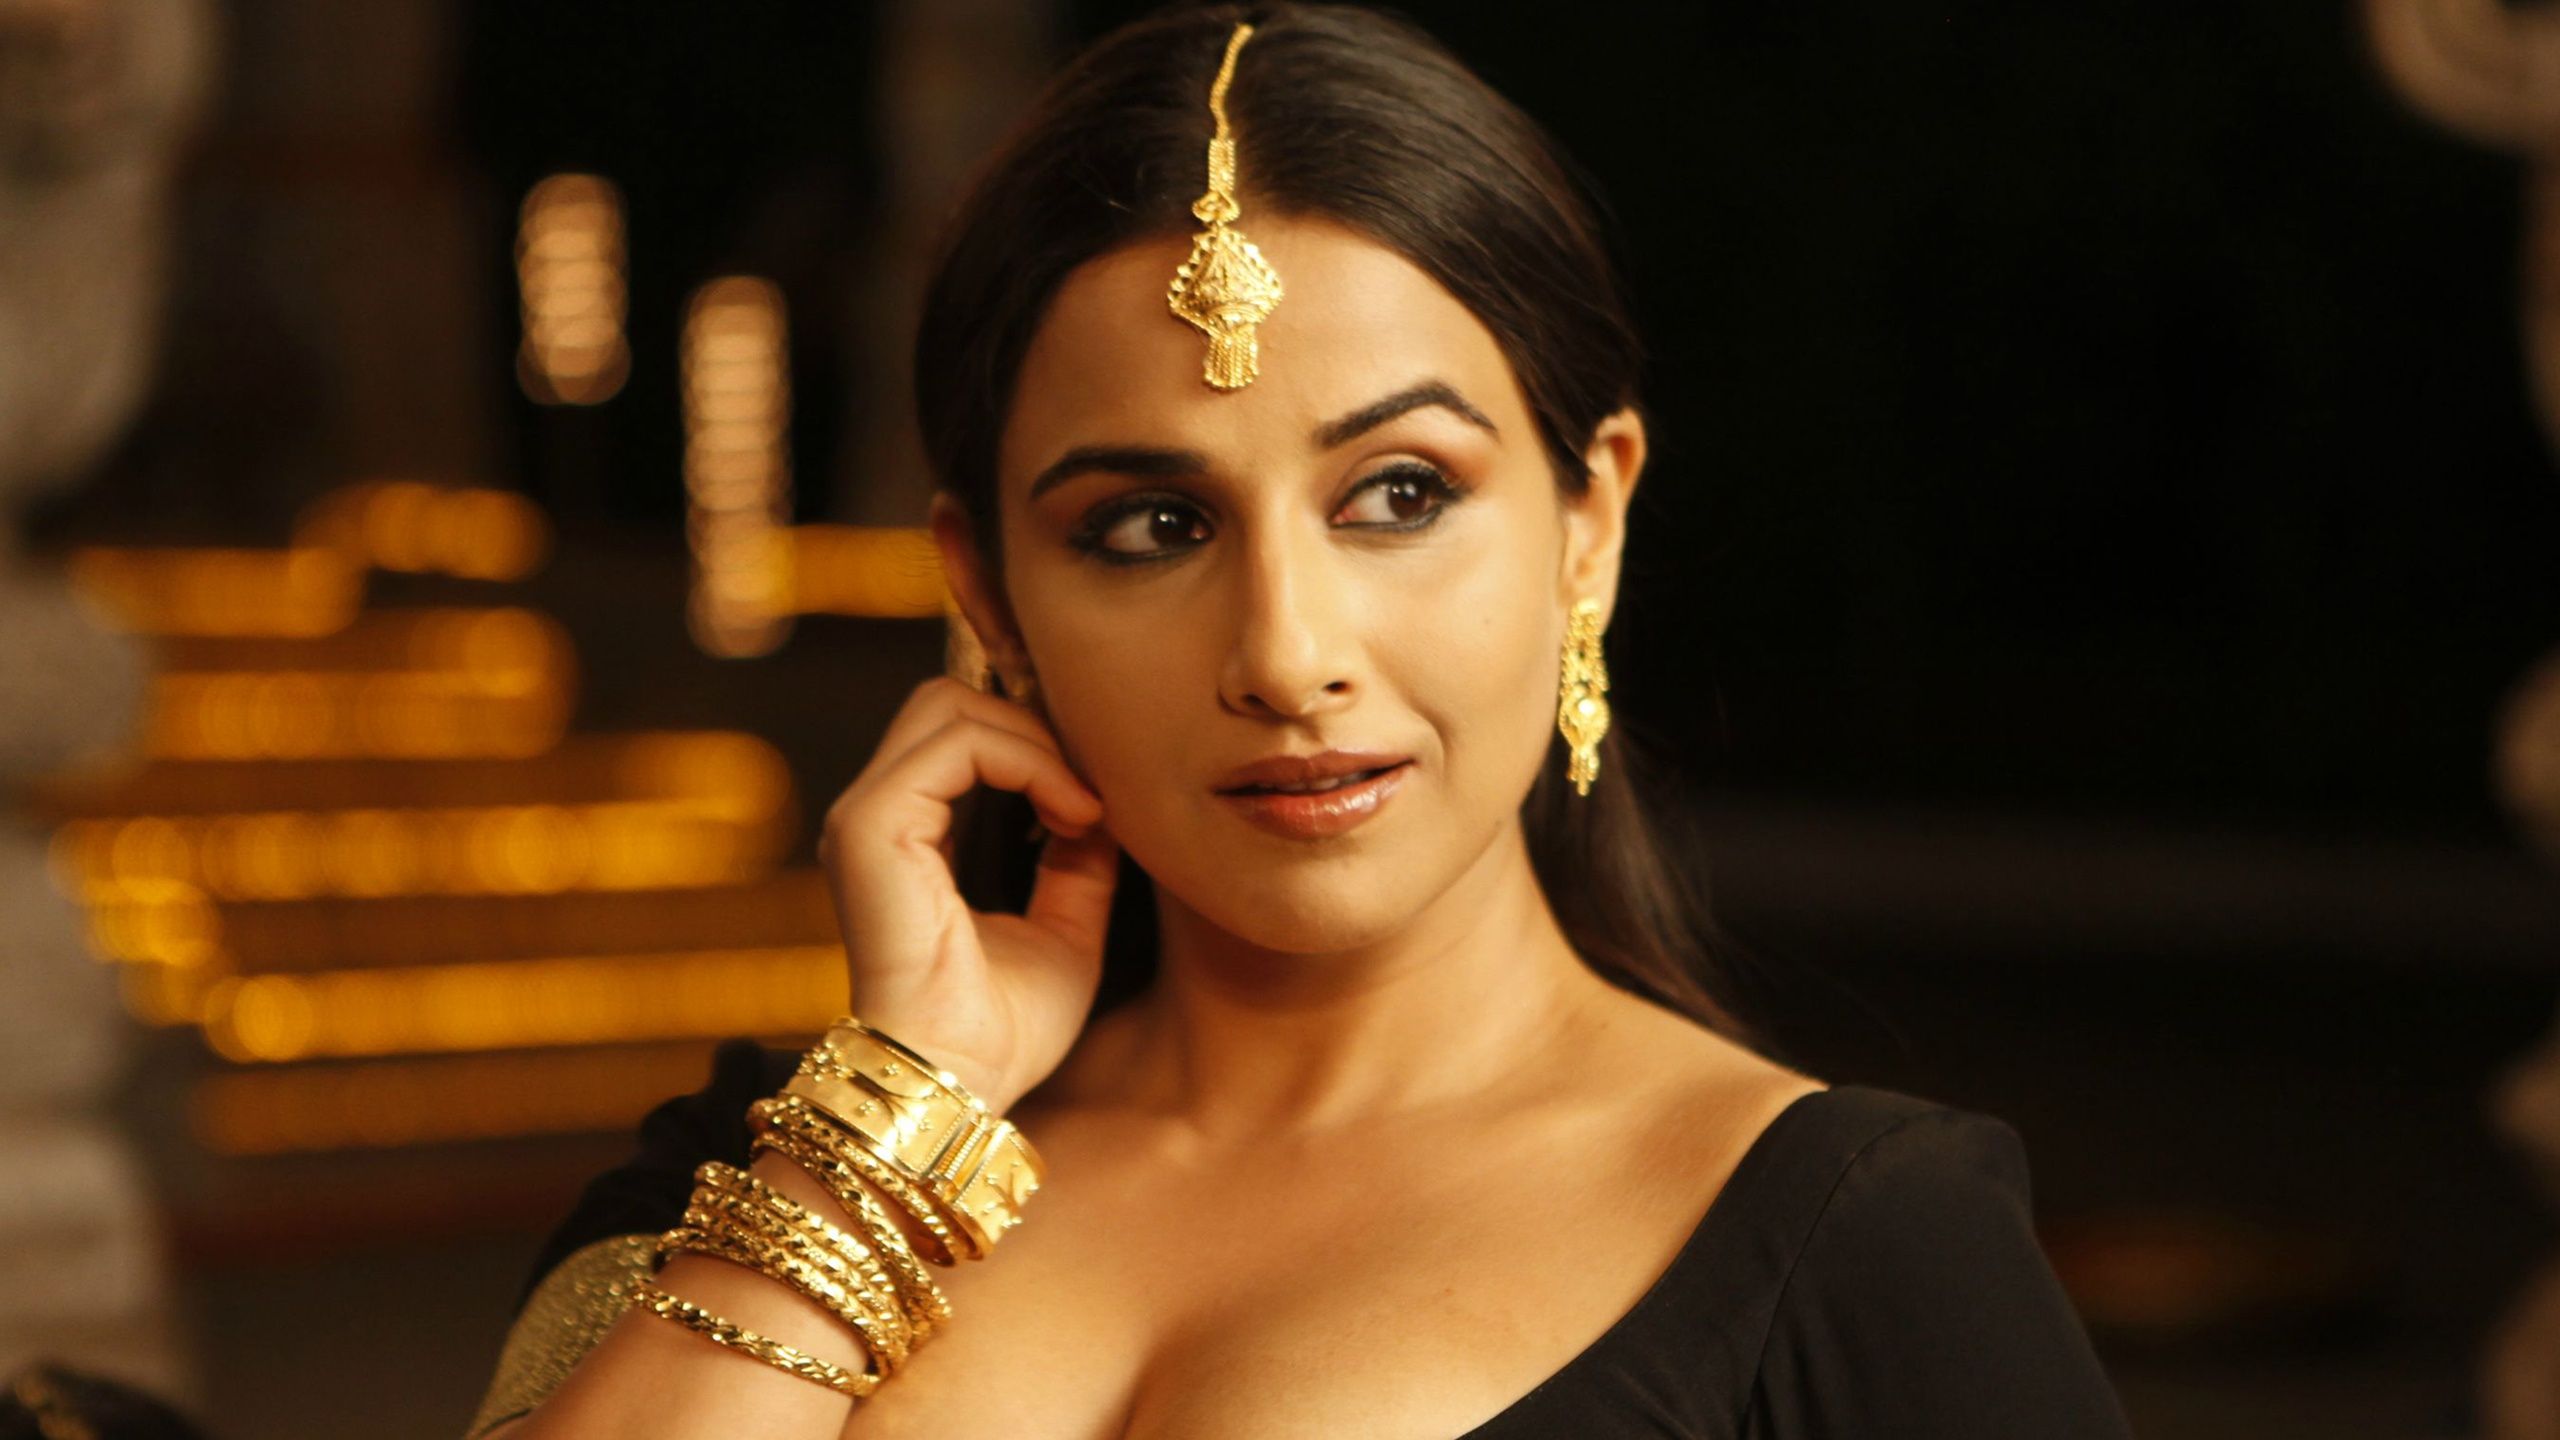 Vidya Balan In The Dirty Picture .all Free Download.com